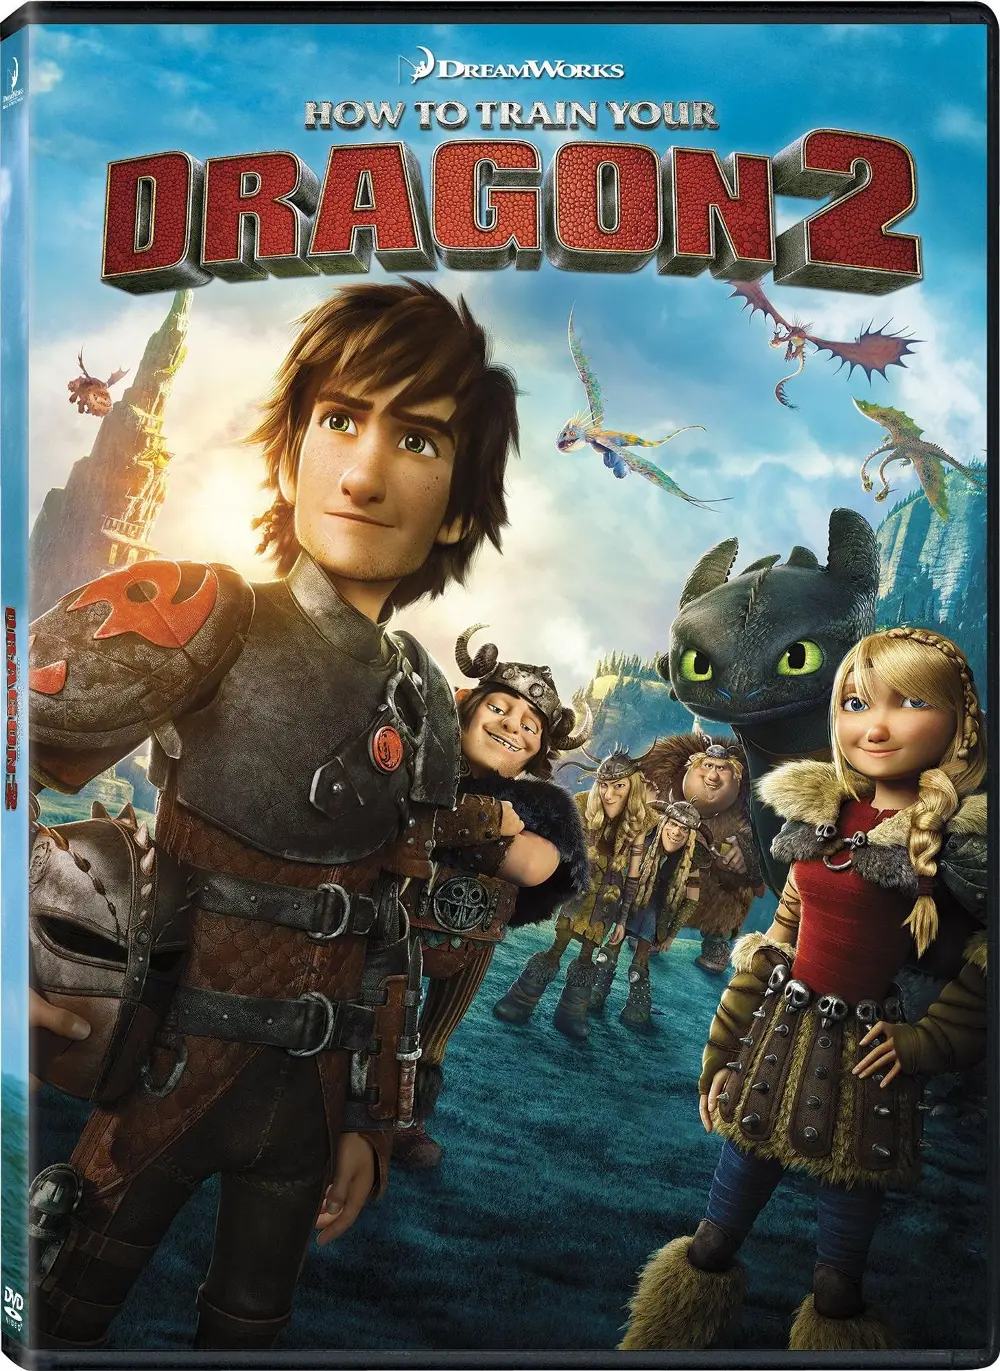 How to Train Your Dragon 2 - DVD-1